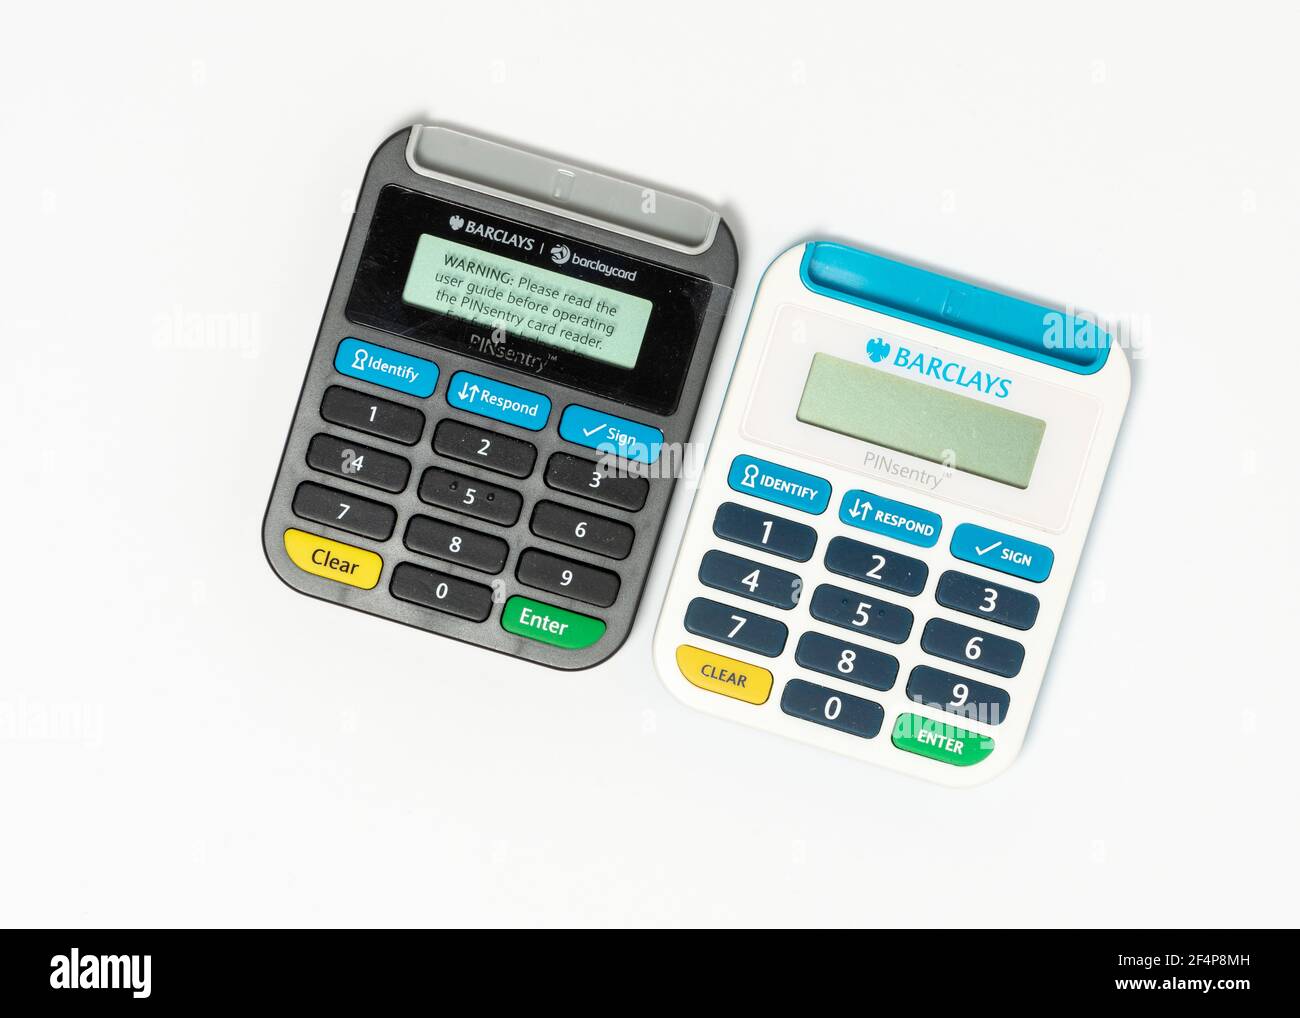 Old and new Barclays Pinsentry card reader devices Stock Photo - Alamy